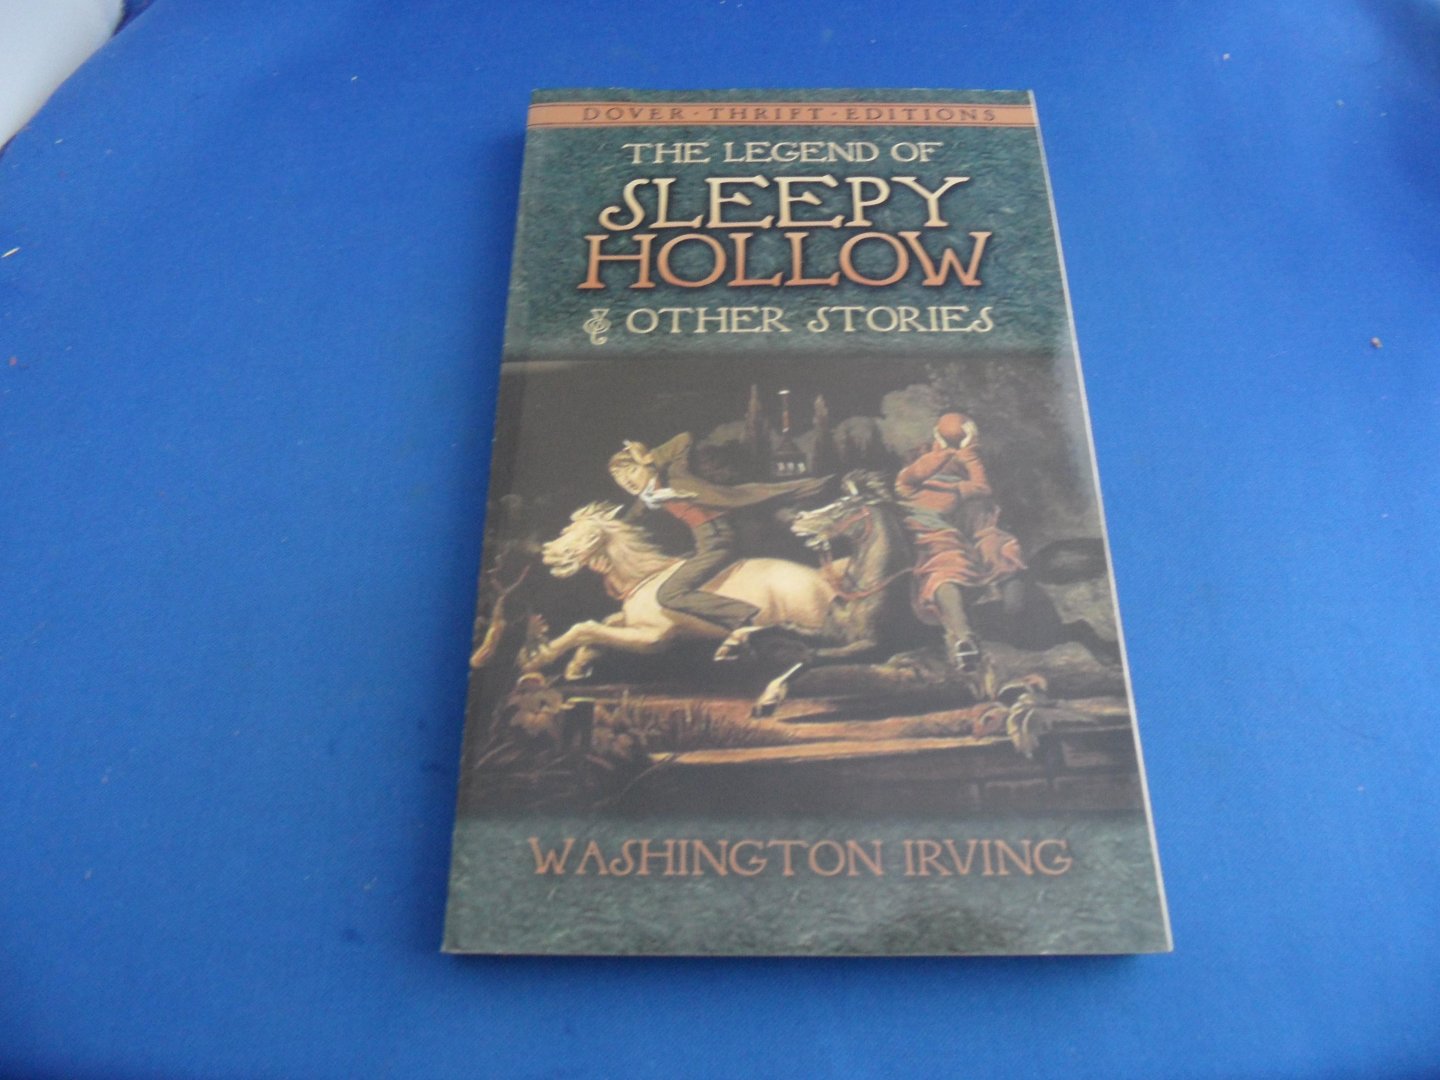 Irving, Washington - The legend of sleepy hollow & other stories